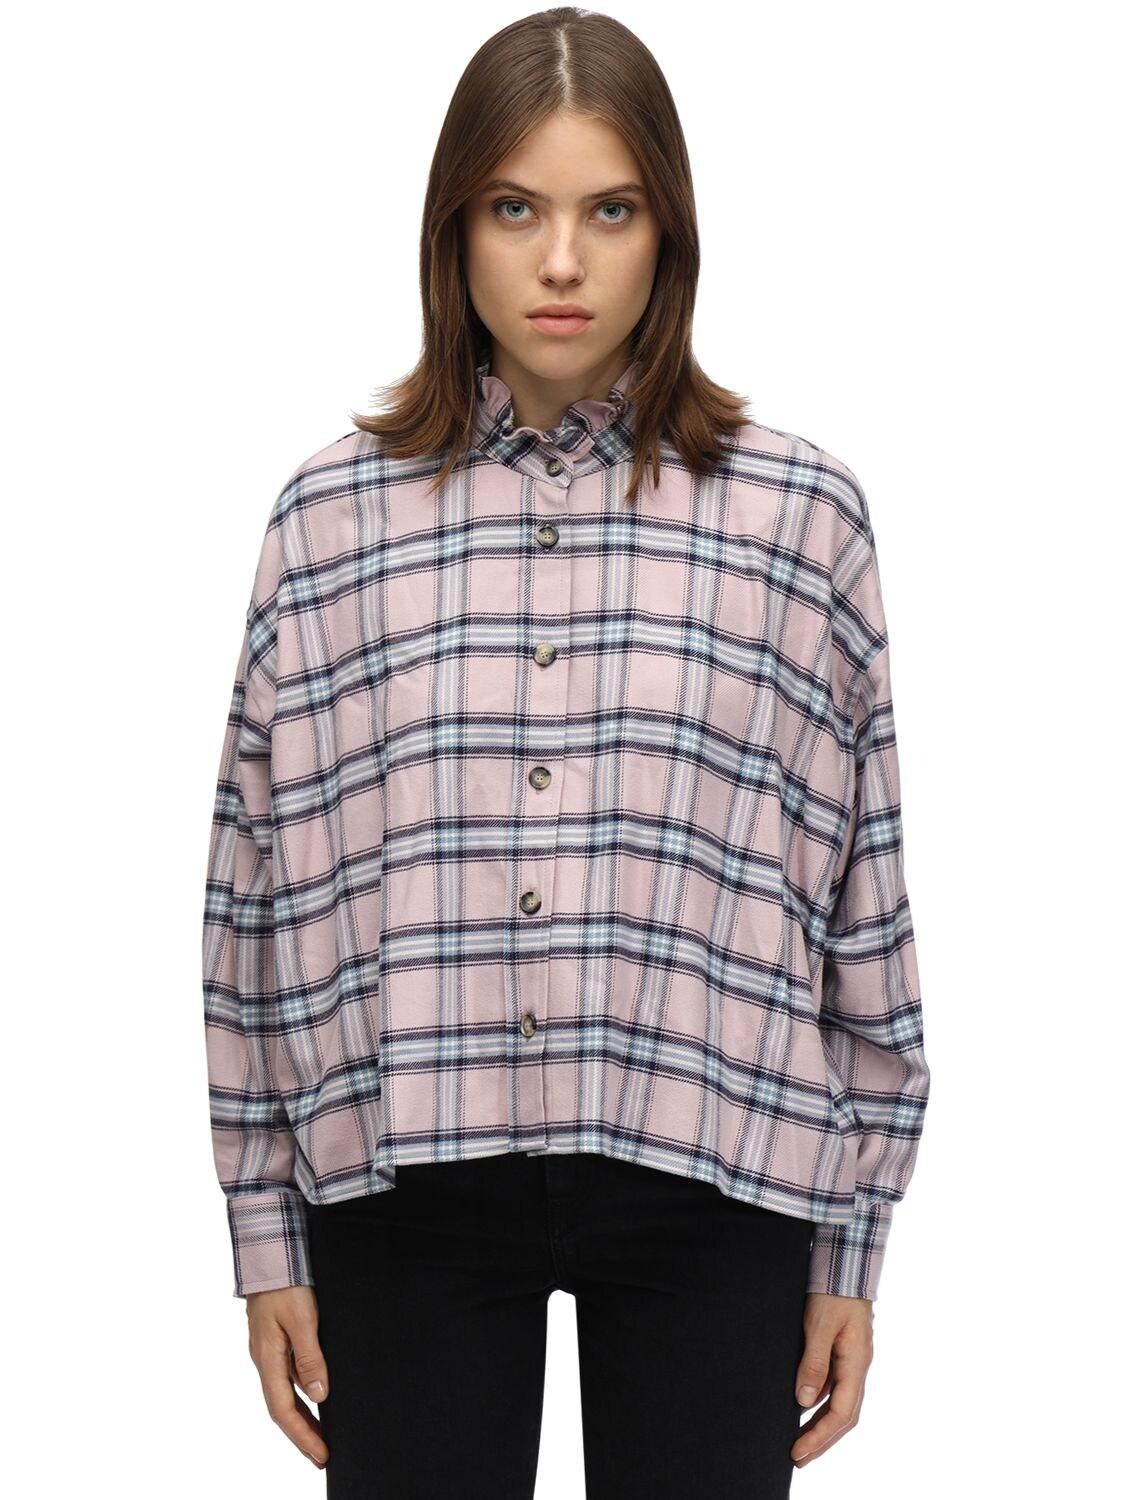 Étoile Isabel Marant Ilaria Ruffled Checked Cotton Shirt in Pink/Blue ...